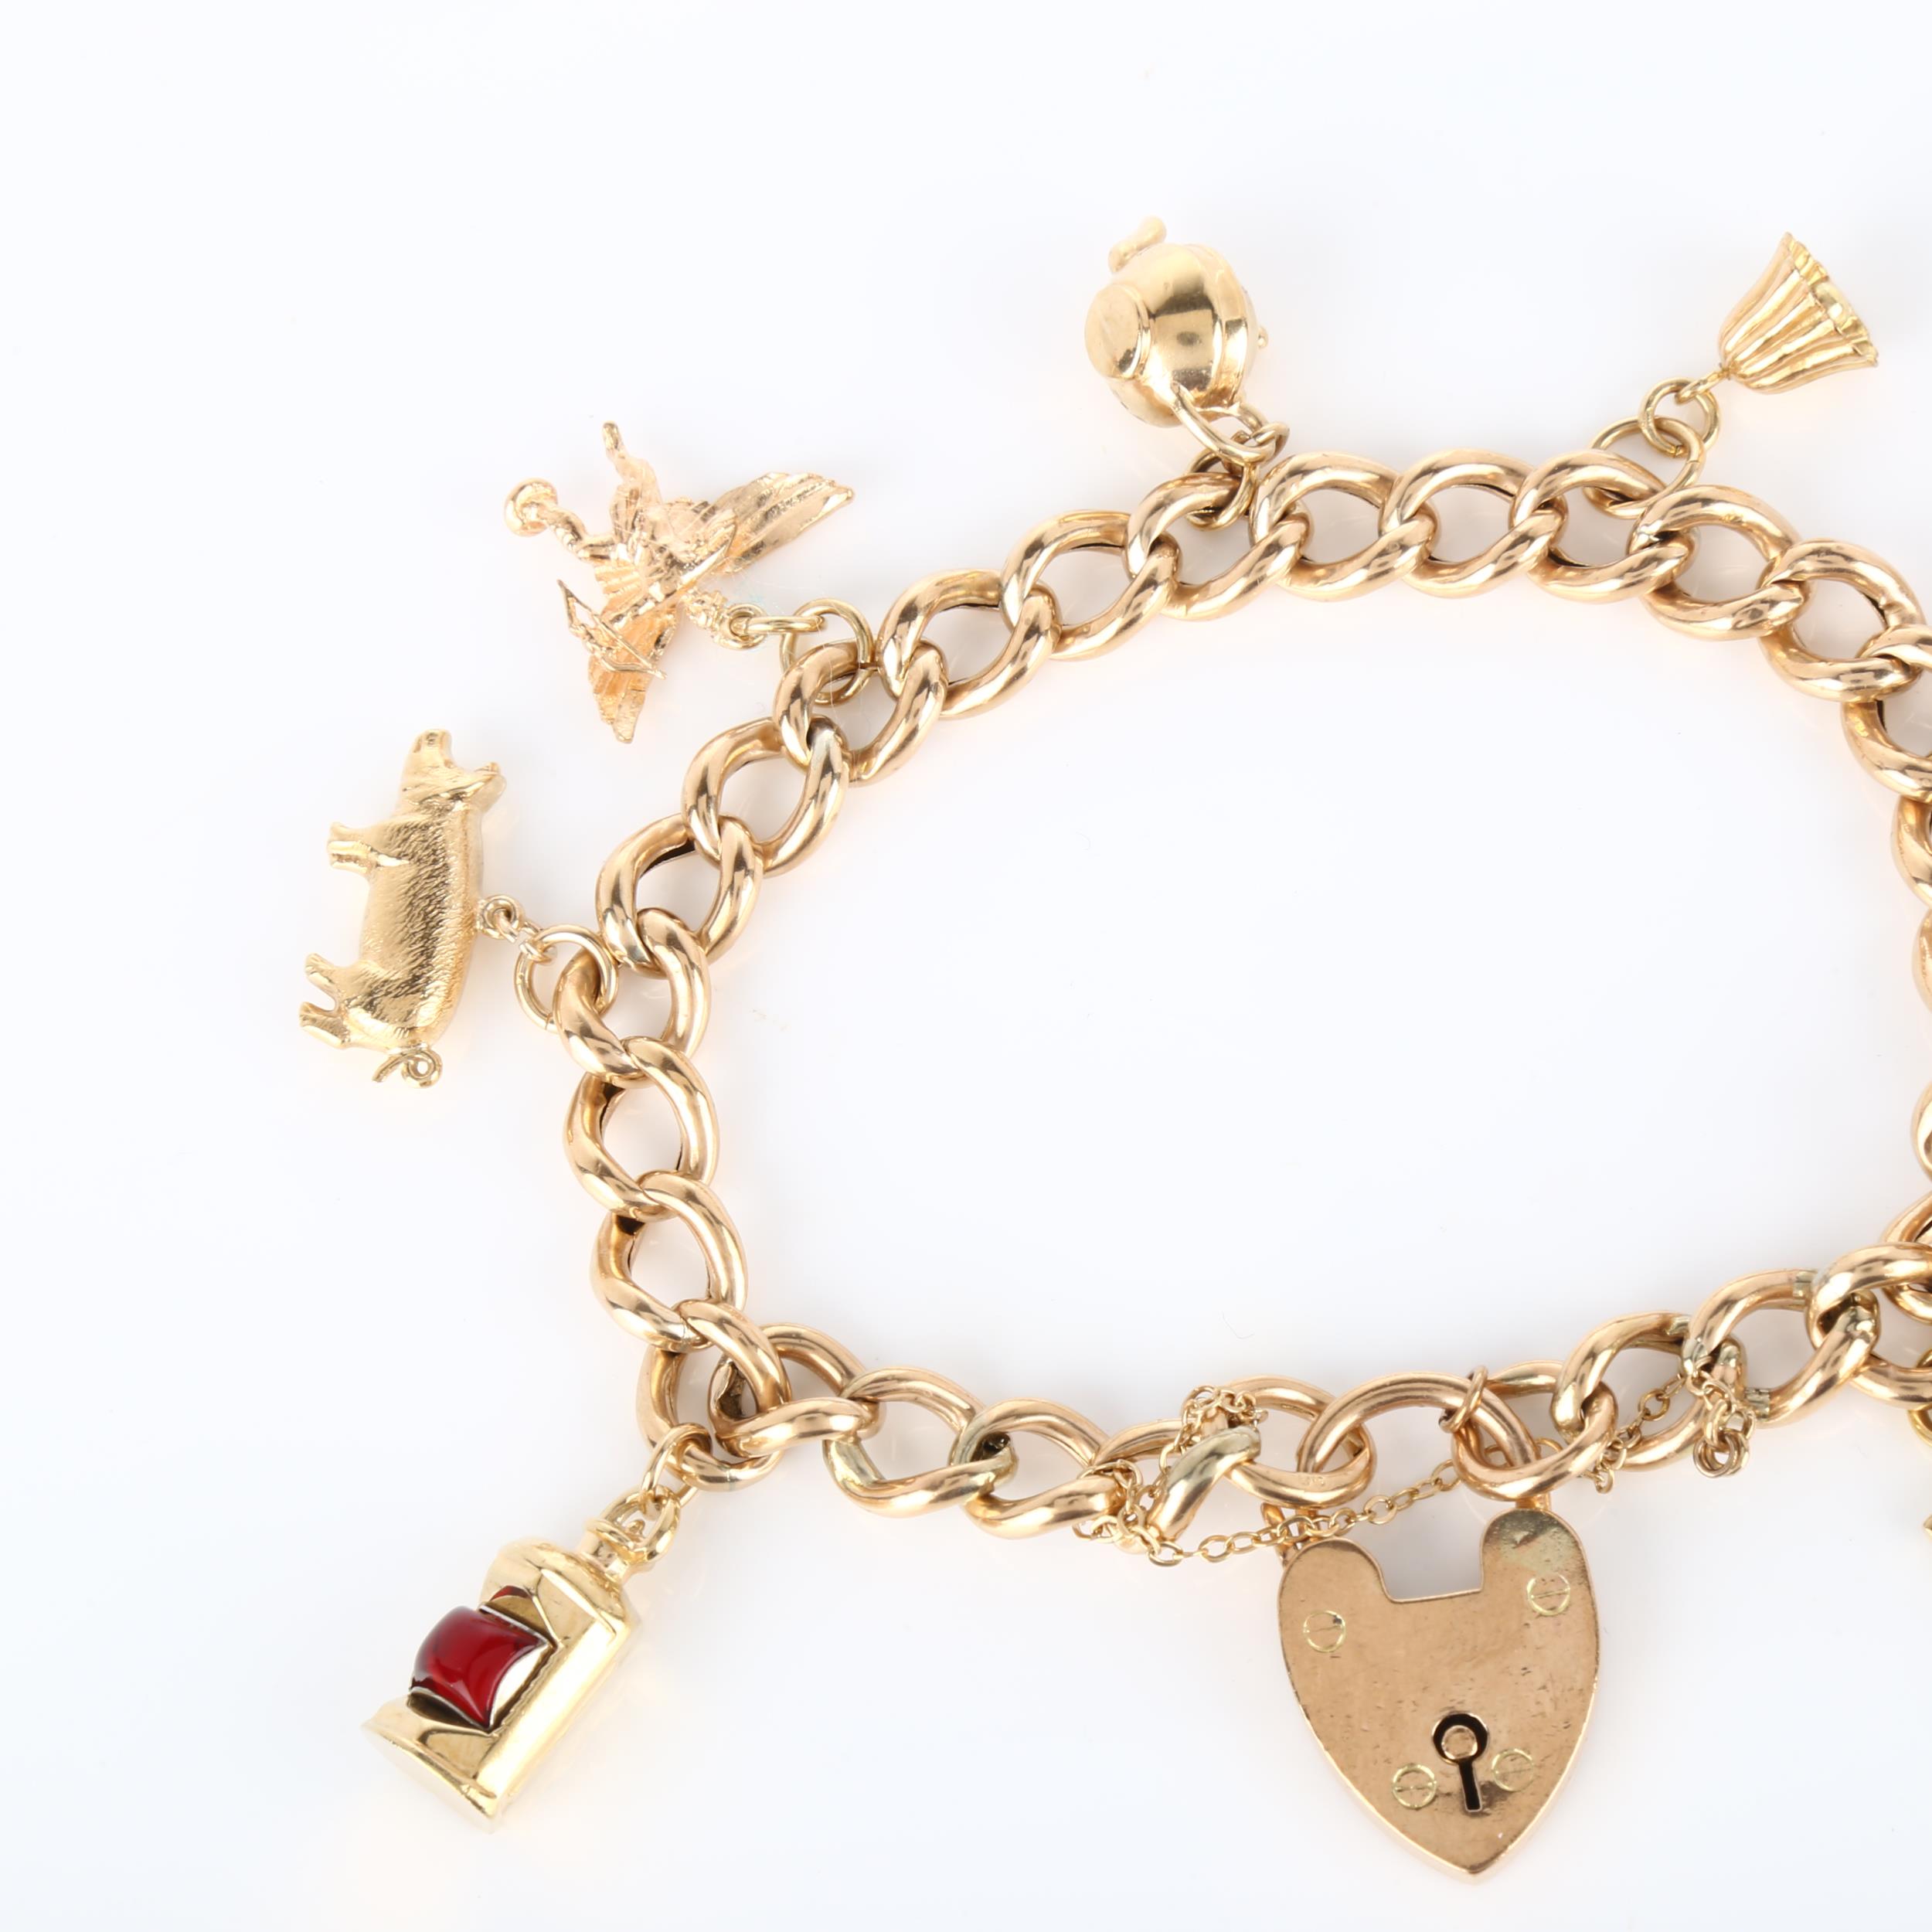 A mid-20th century 9ct gold hollow curb link charm bracelet, with 8 gold charms and heart padlock - Image 3 of 4